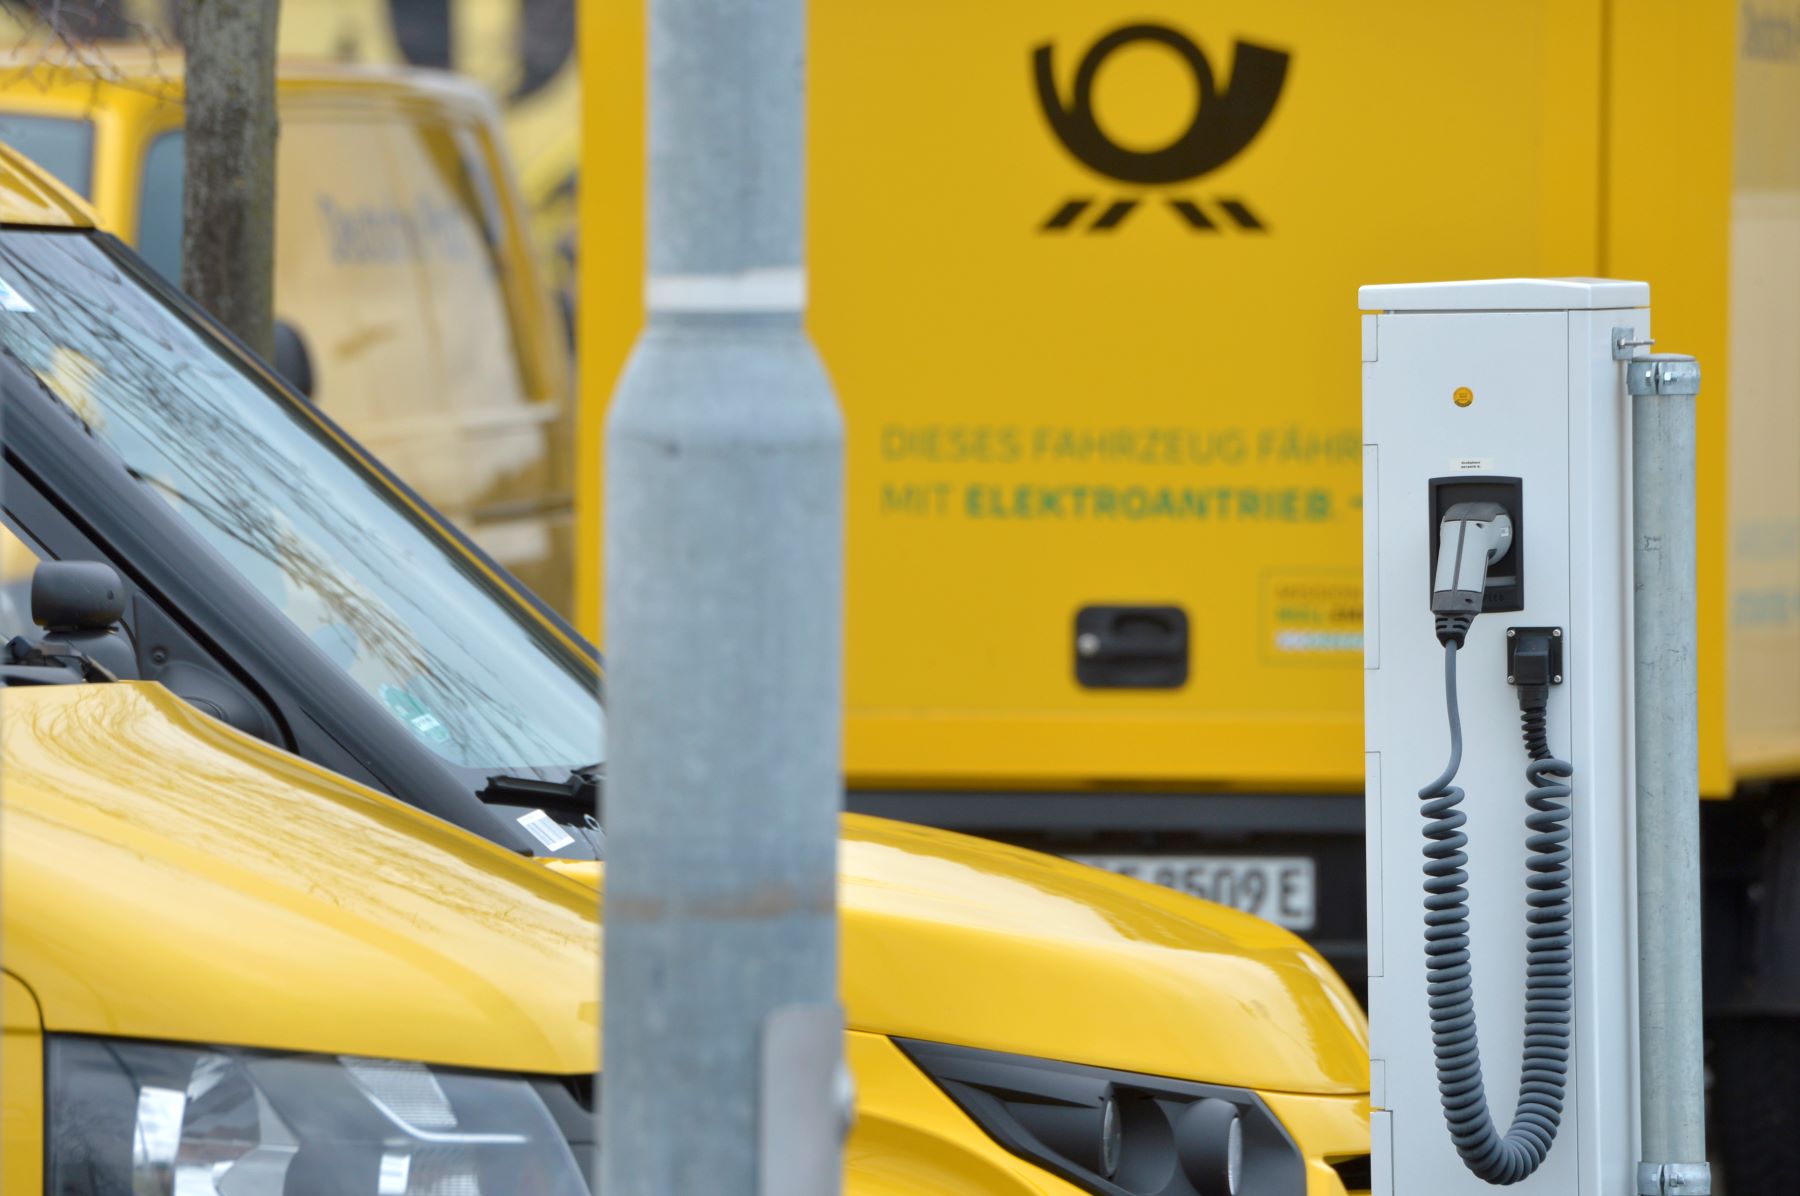 German company Deutsche Post's StreetScooter electric transporter charging stations